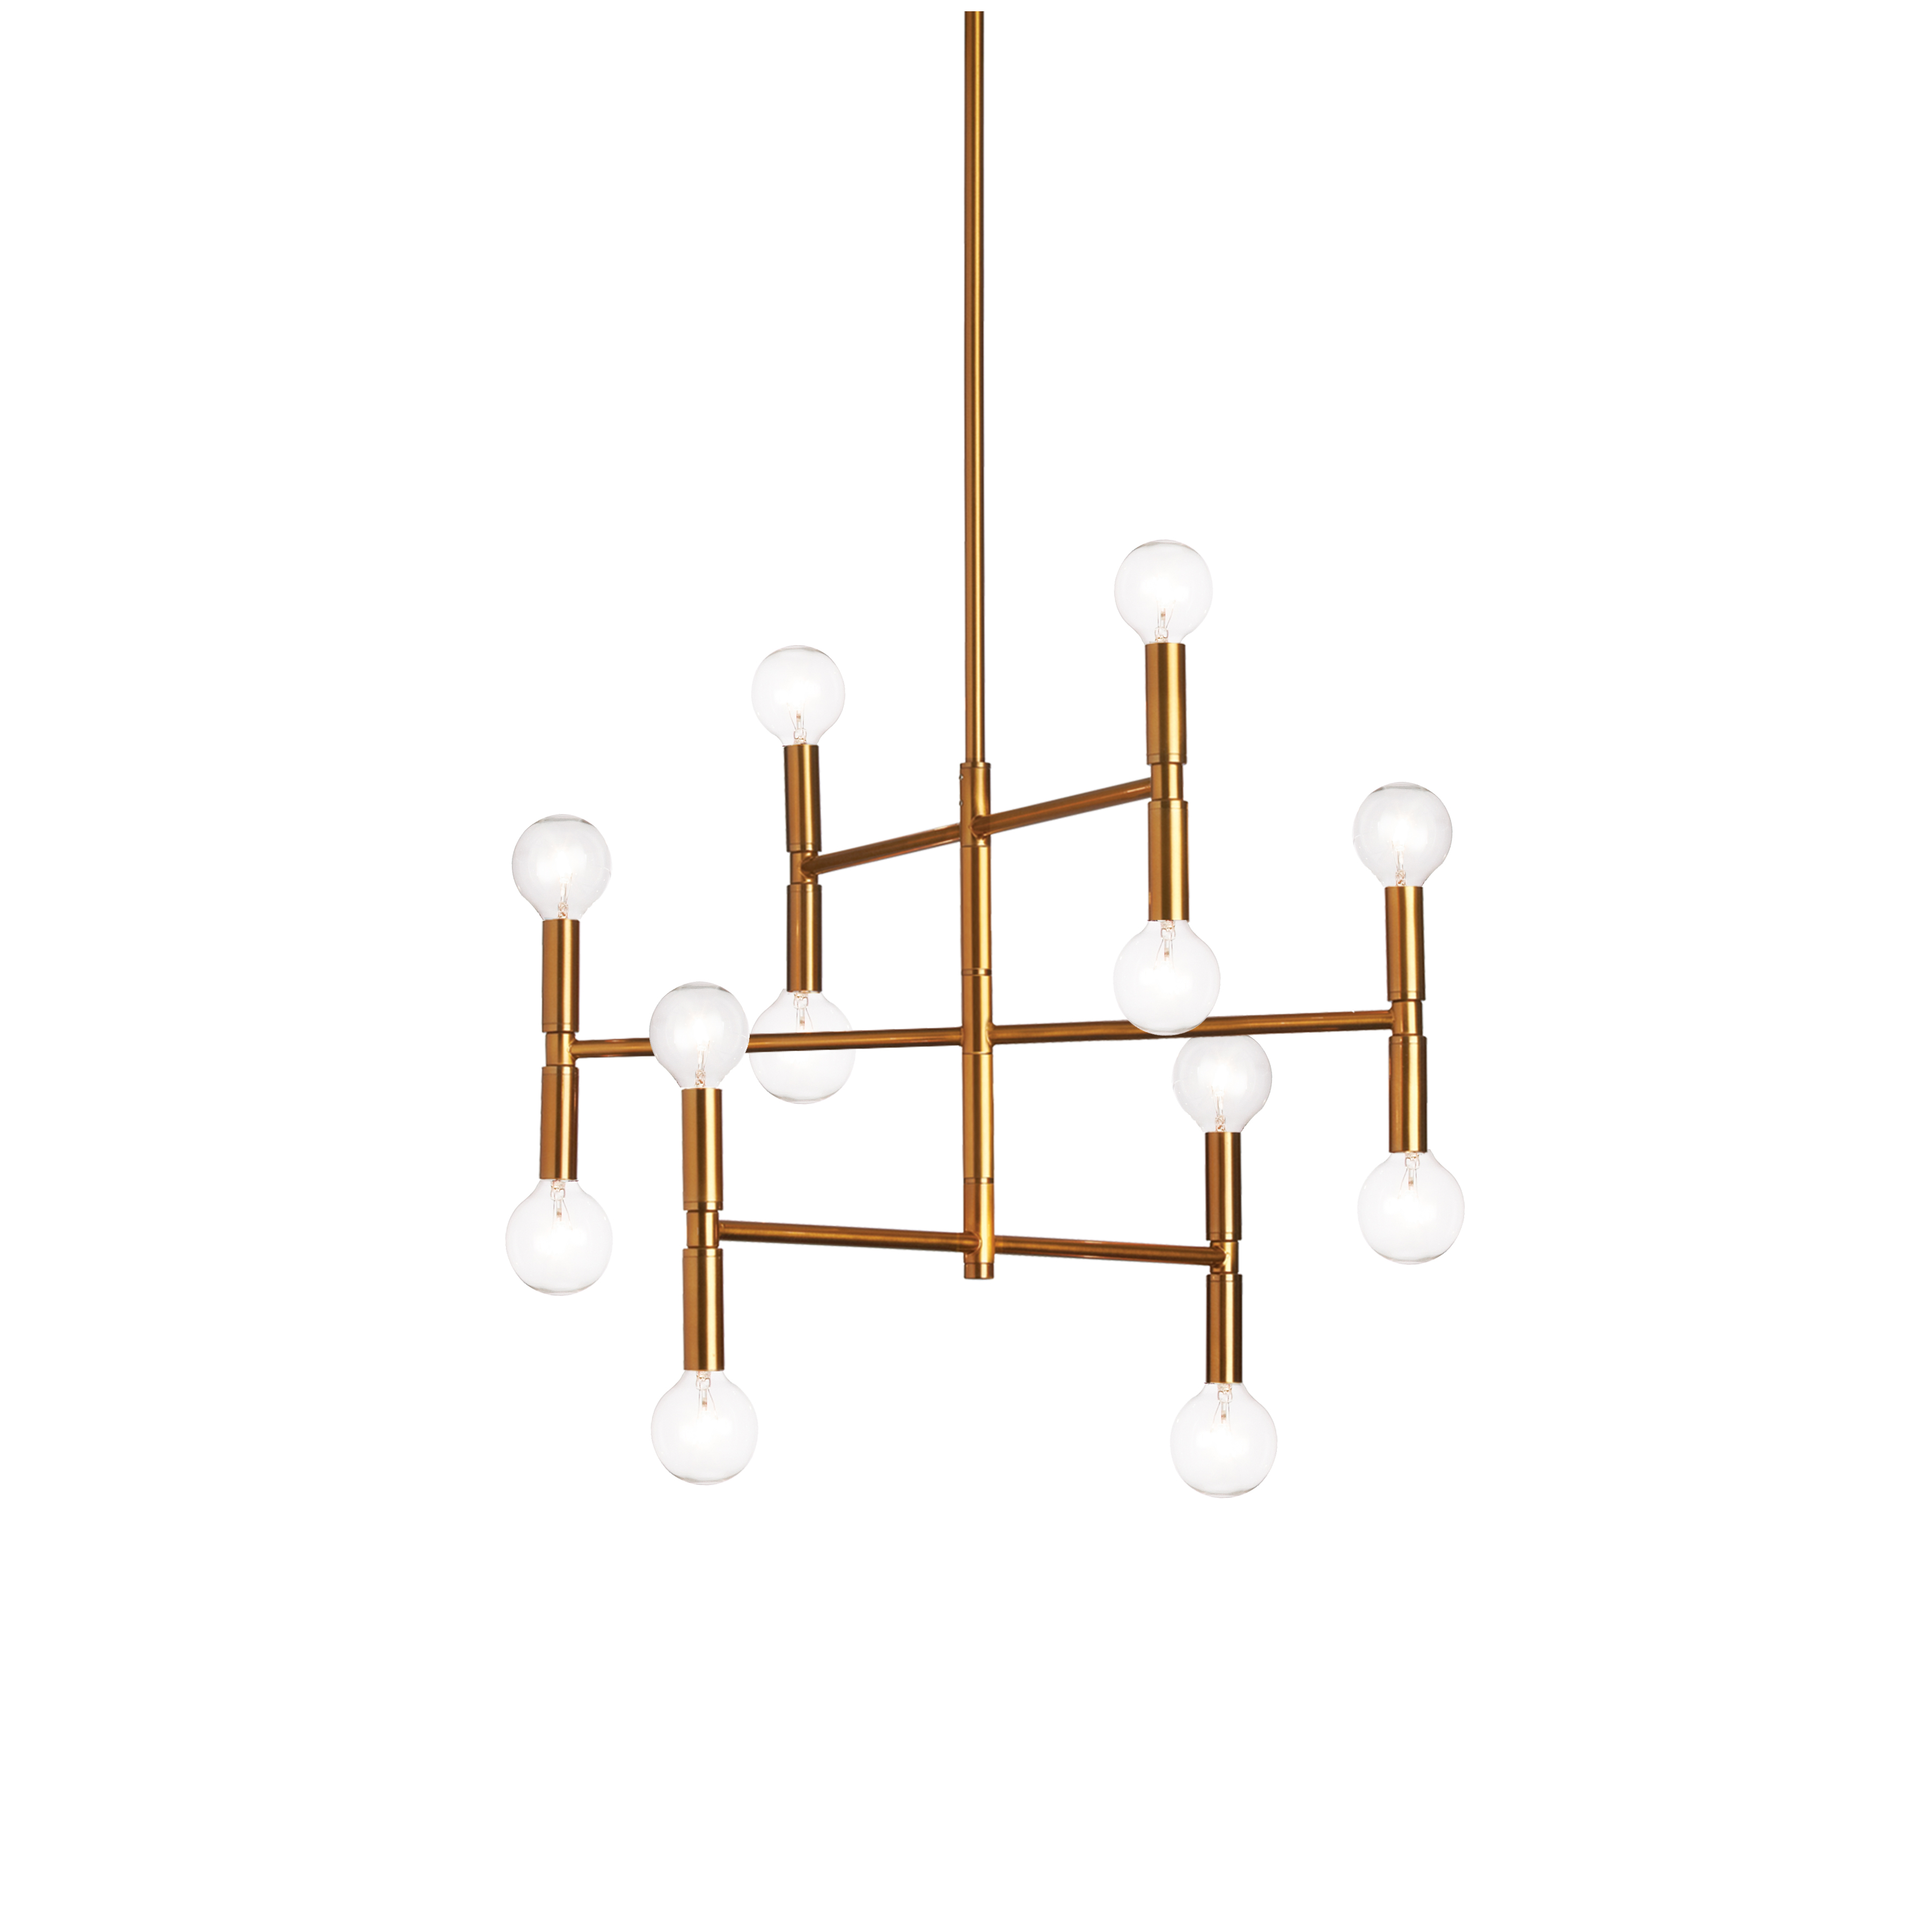 Ava chandelier lights pop out of a contemporary design scheme with an artistic appeal. They can become the focal point of any room, from the living or dining room to a master bedroom. The unique beauty of this family of lighting is based on an asymmetrical linear pattern created by a metal base and arms in your choice of elegant finish. Smaller round lights at both ends of each arm complete a refined and sophisticated look. Ava lighting is an easy way to enliven any simple room design, and add both textural and linear appeal.